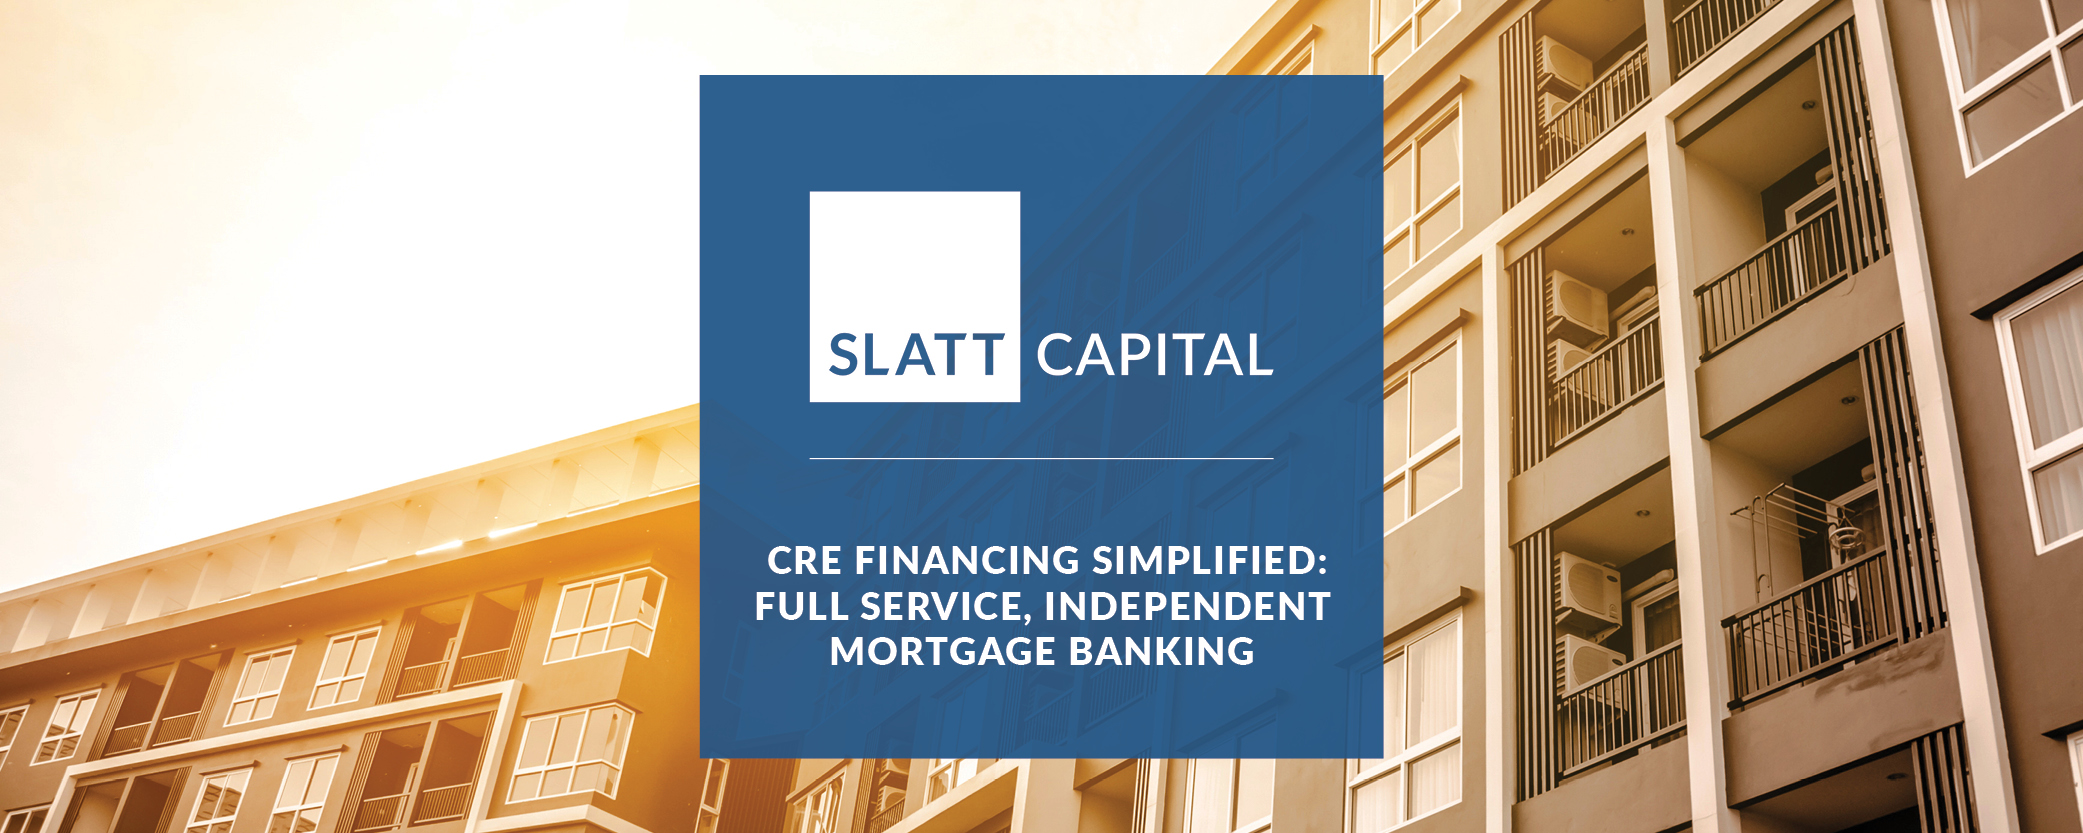 Cre financ: full service, independent mortgage banking